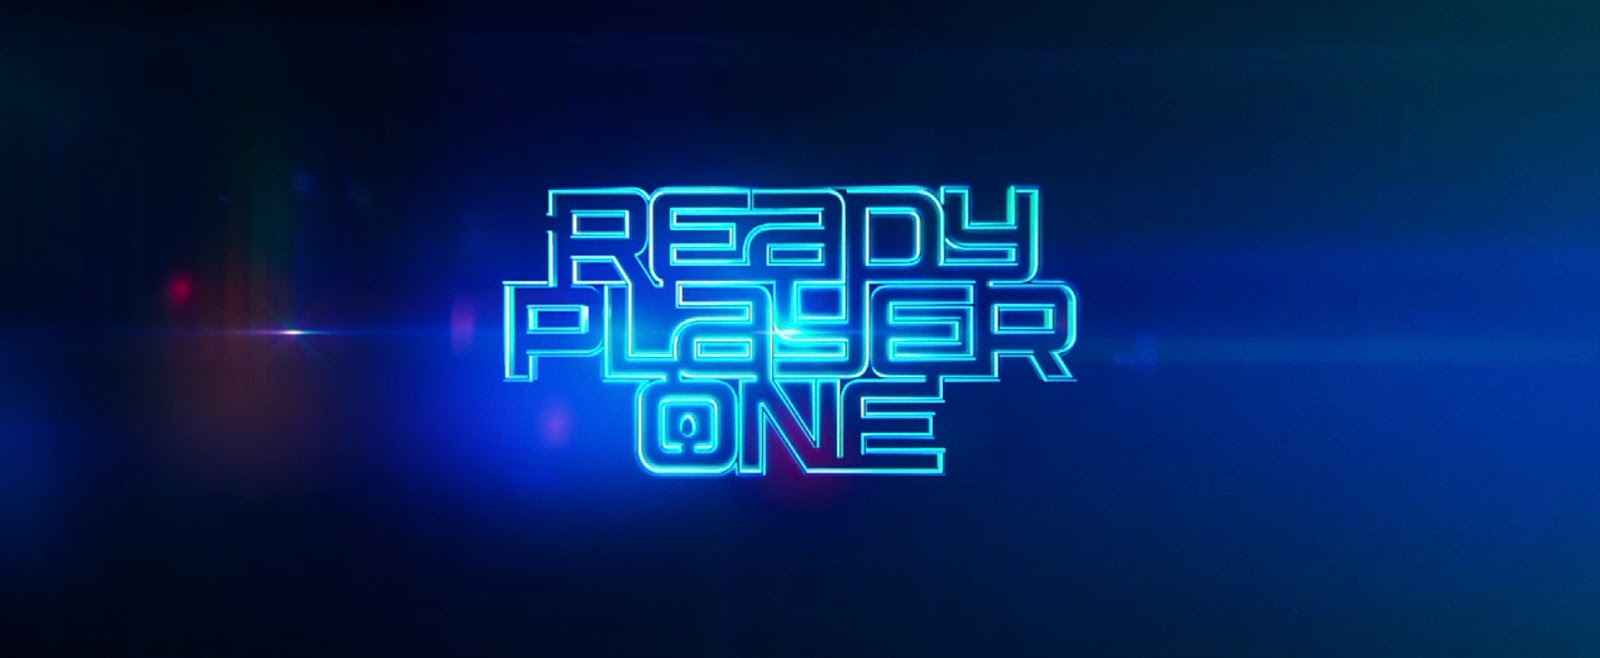 Jon Crunch: Movie Review: “Ready Player One”